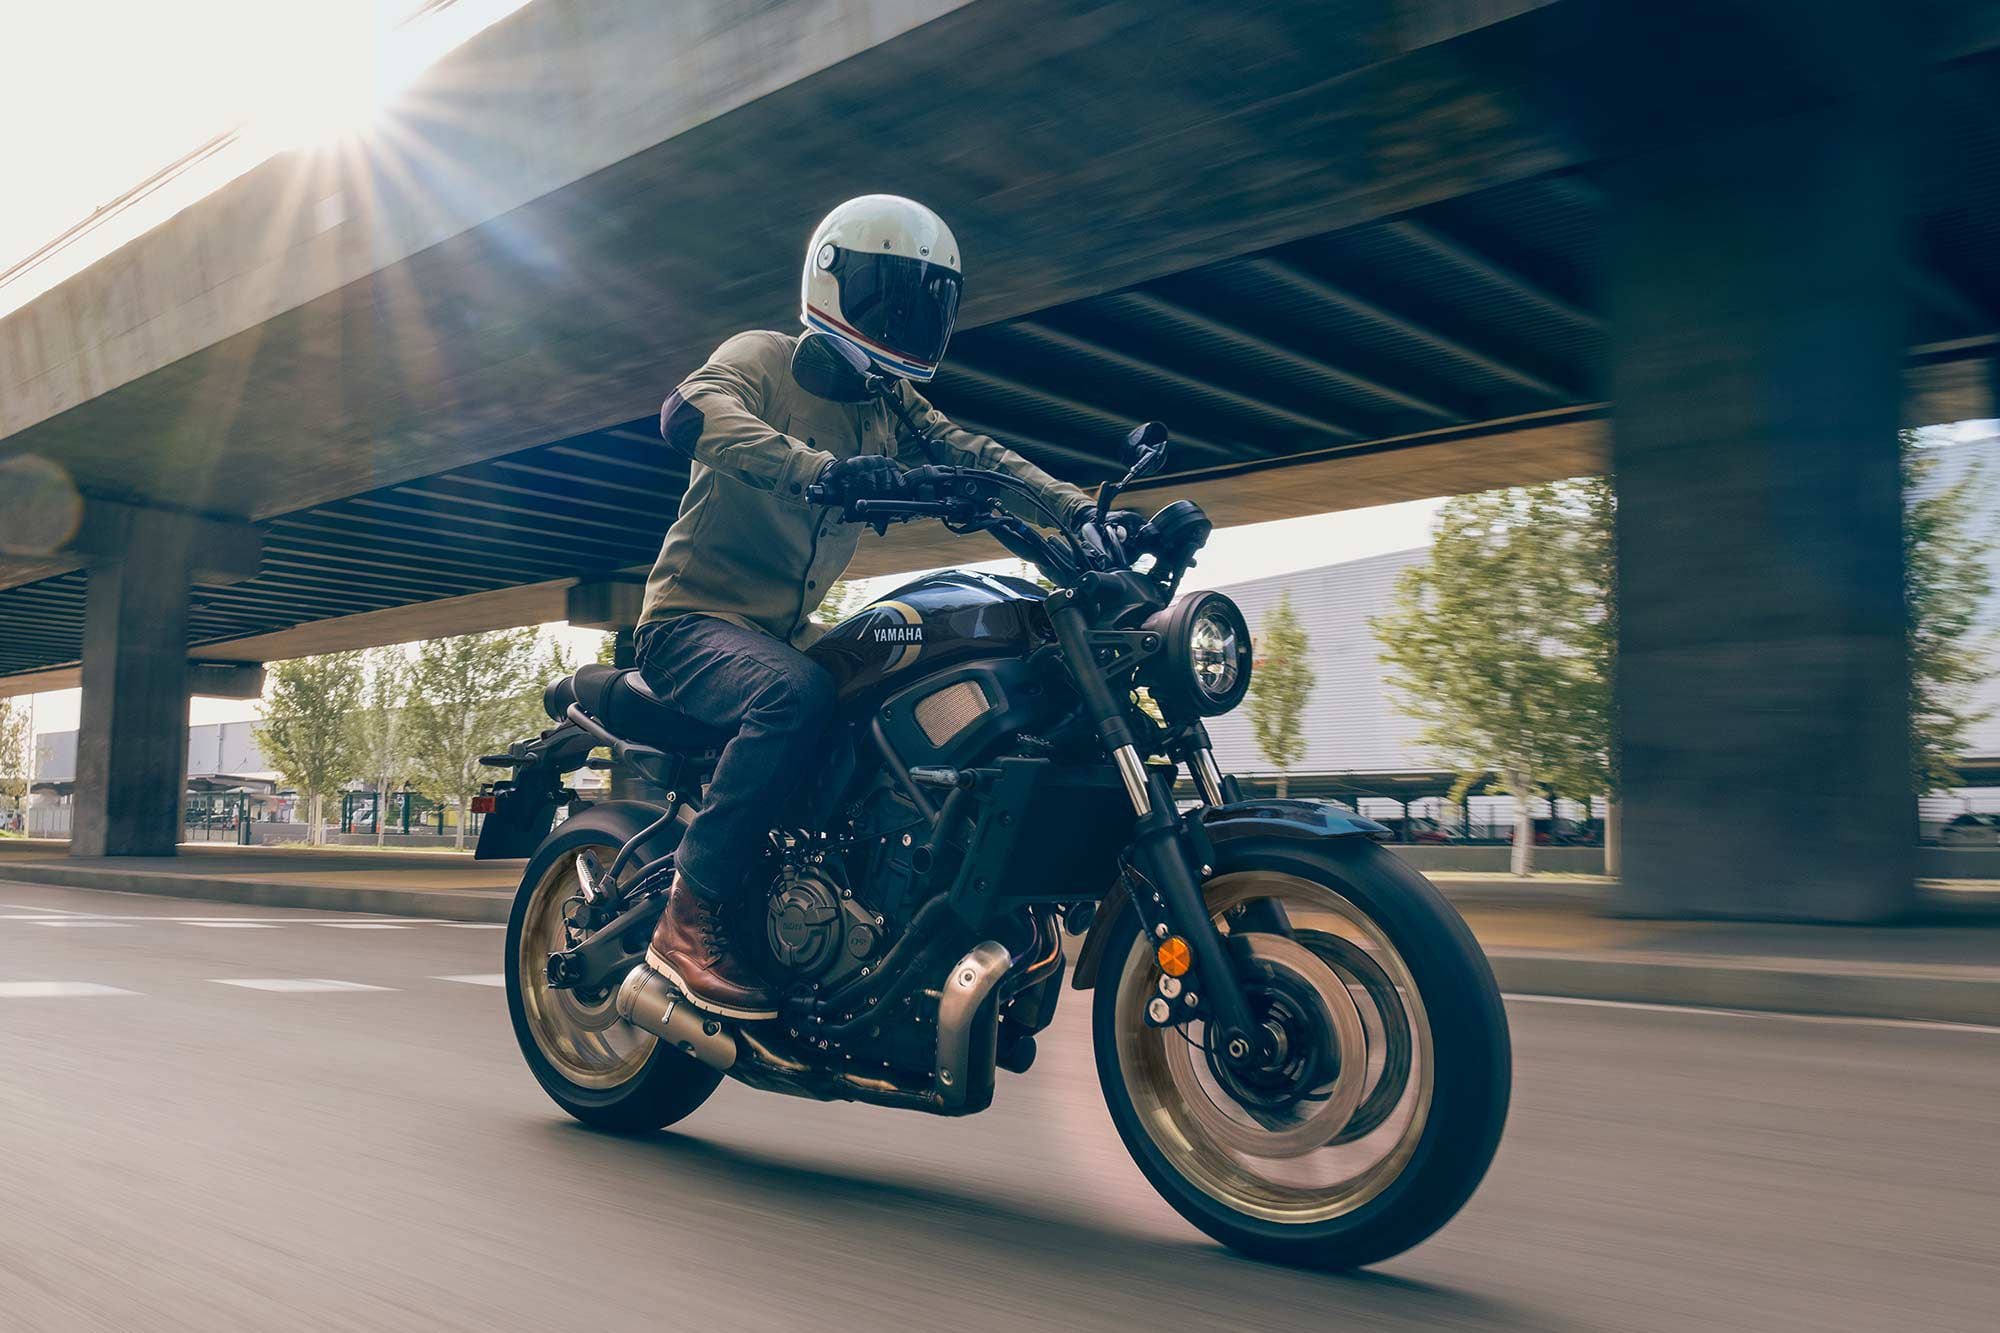 The new 2022 Yamaha XSR700 will hit dealerships in December.